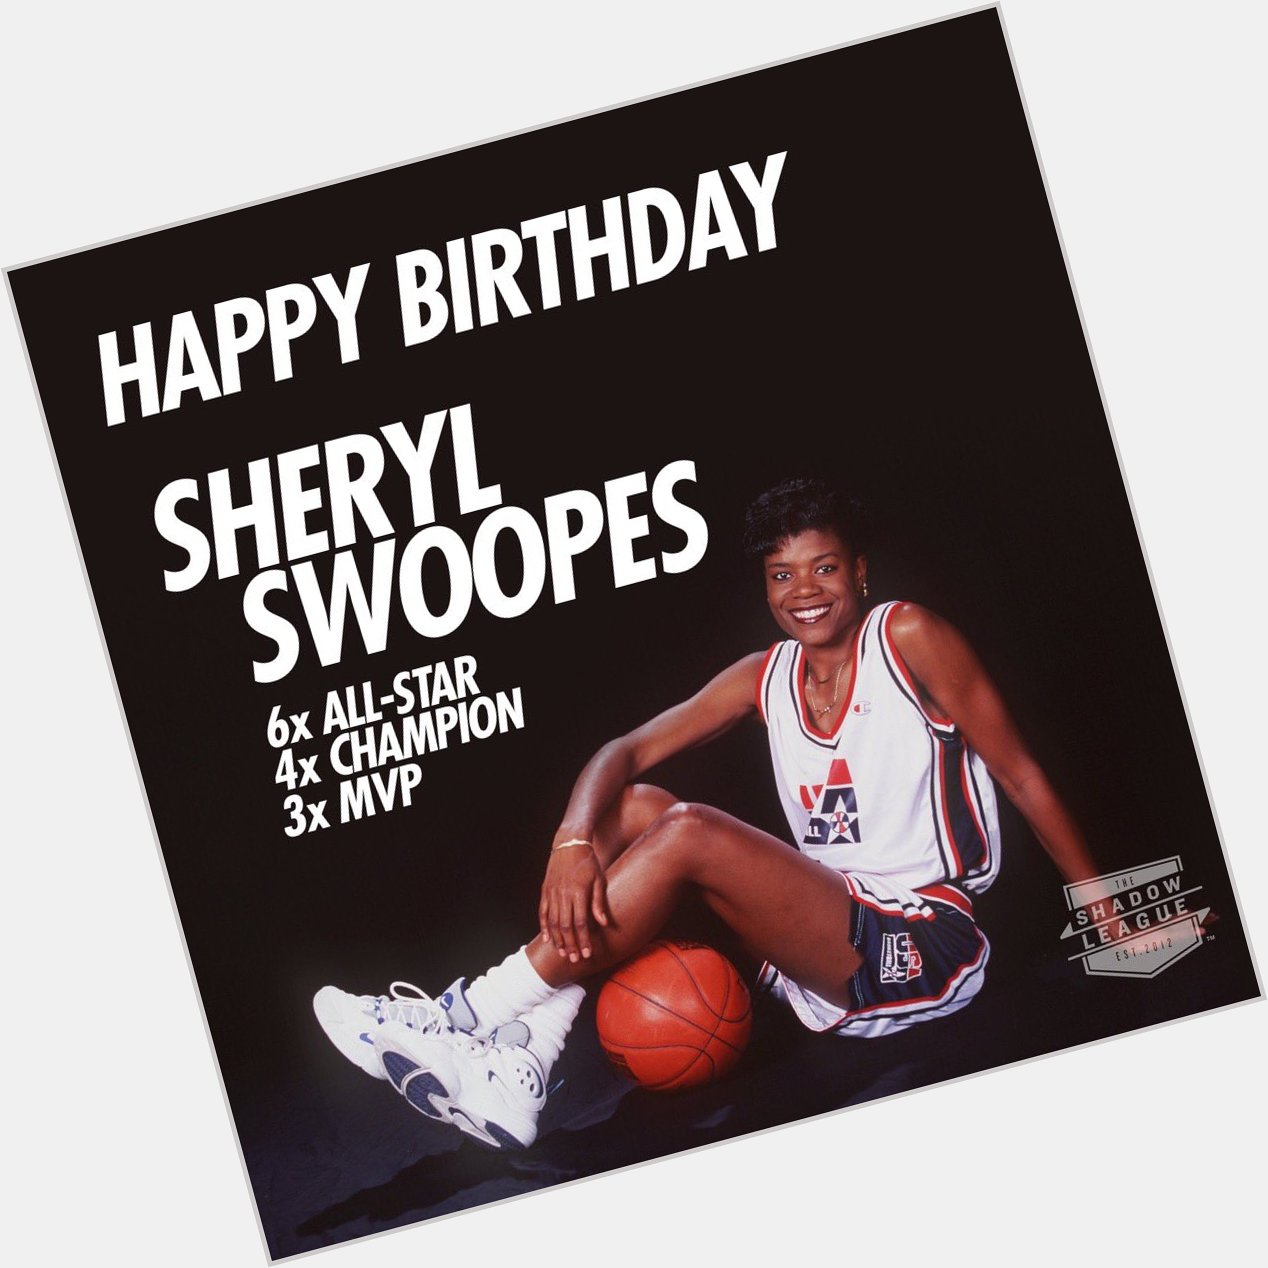 Happy 47th birthday to Sheryl Swoopes! 